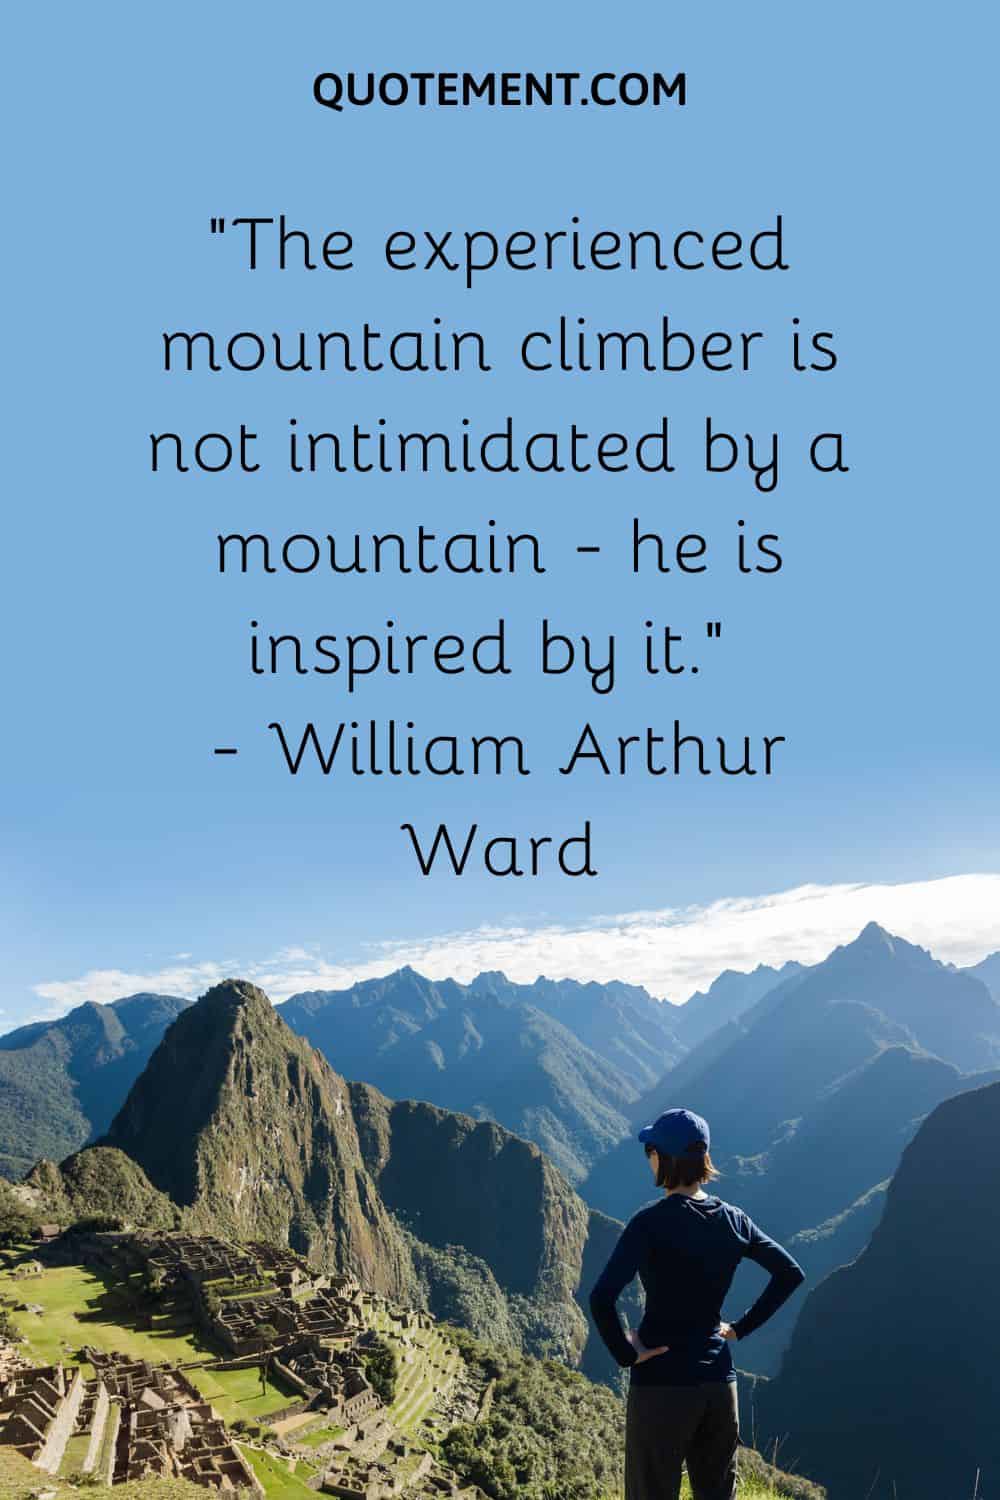 “The experienced mountain climber is not intimidated by a mountain — he is inspired by it.” — William Arthur Ward